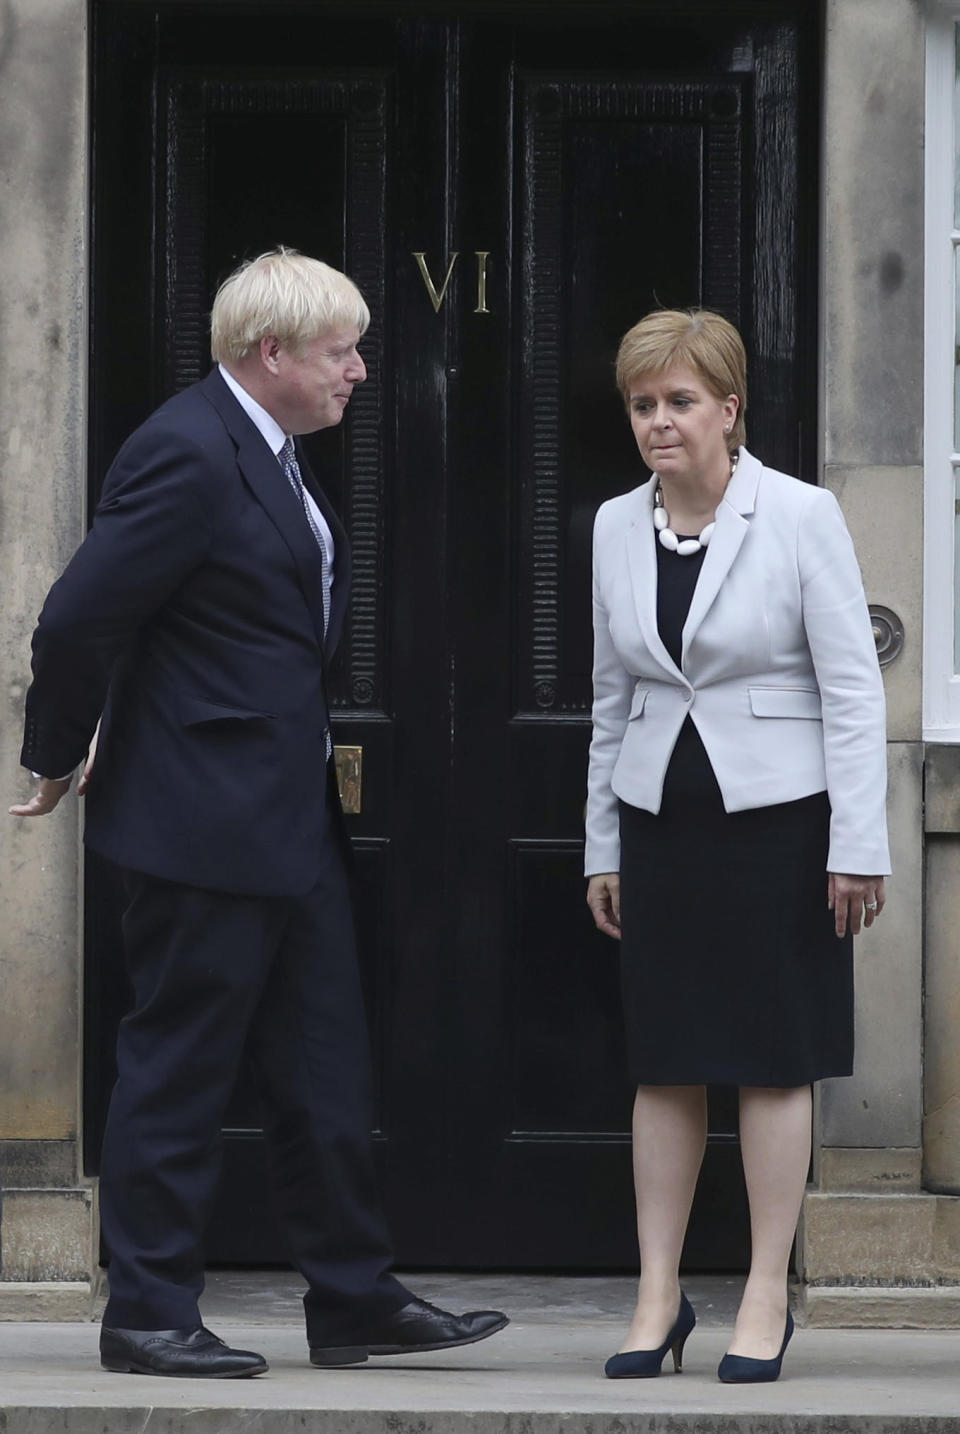 Scotland's First Minister Nicola Sturgeon, right, welcomes Britain's Prime Minister Boris Johnson, outside Bute House, ahead of their meeting, in Edinburgh, Scotland, Monday July 29, 2019. Johnson made his first official visit as British prime minister to Scotland, pledging to boost "the ties that bind our United Kingdom" amid opposition from Scottish leaders to his insistence on pulling Britain out of the European Union with or without a deal. (Jane Barlow/PA via AP)